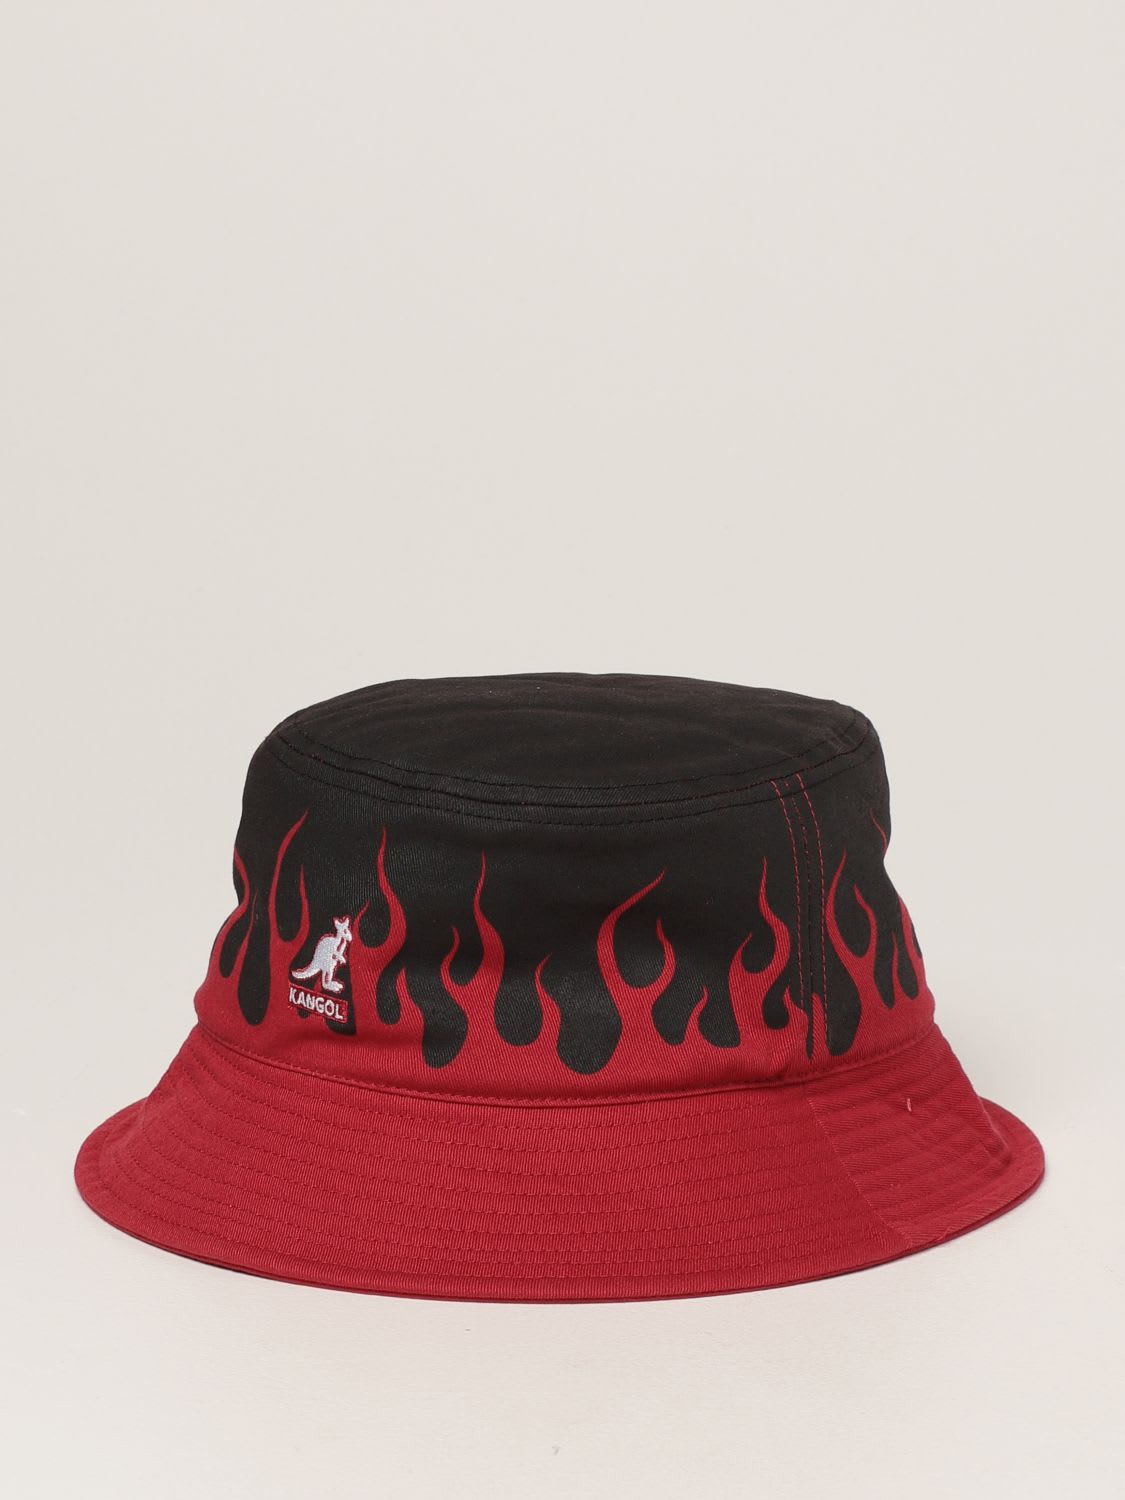 Vision Of Super Hat Vision Of Super X Kangol Fisherman Hat With Flames